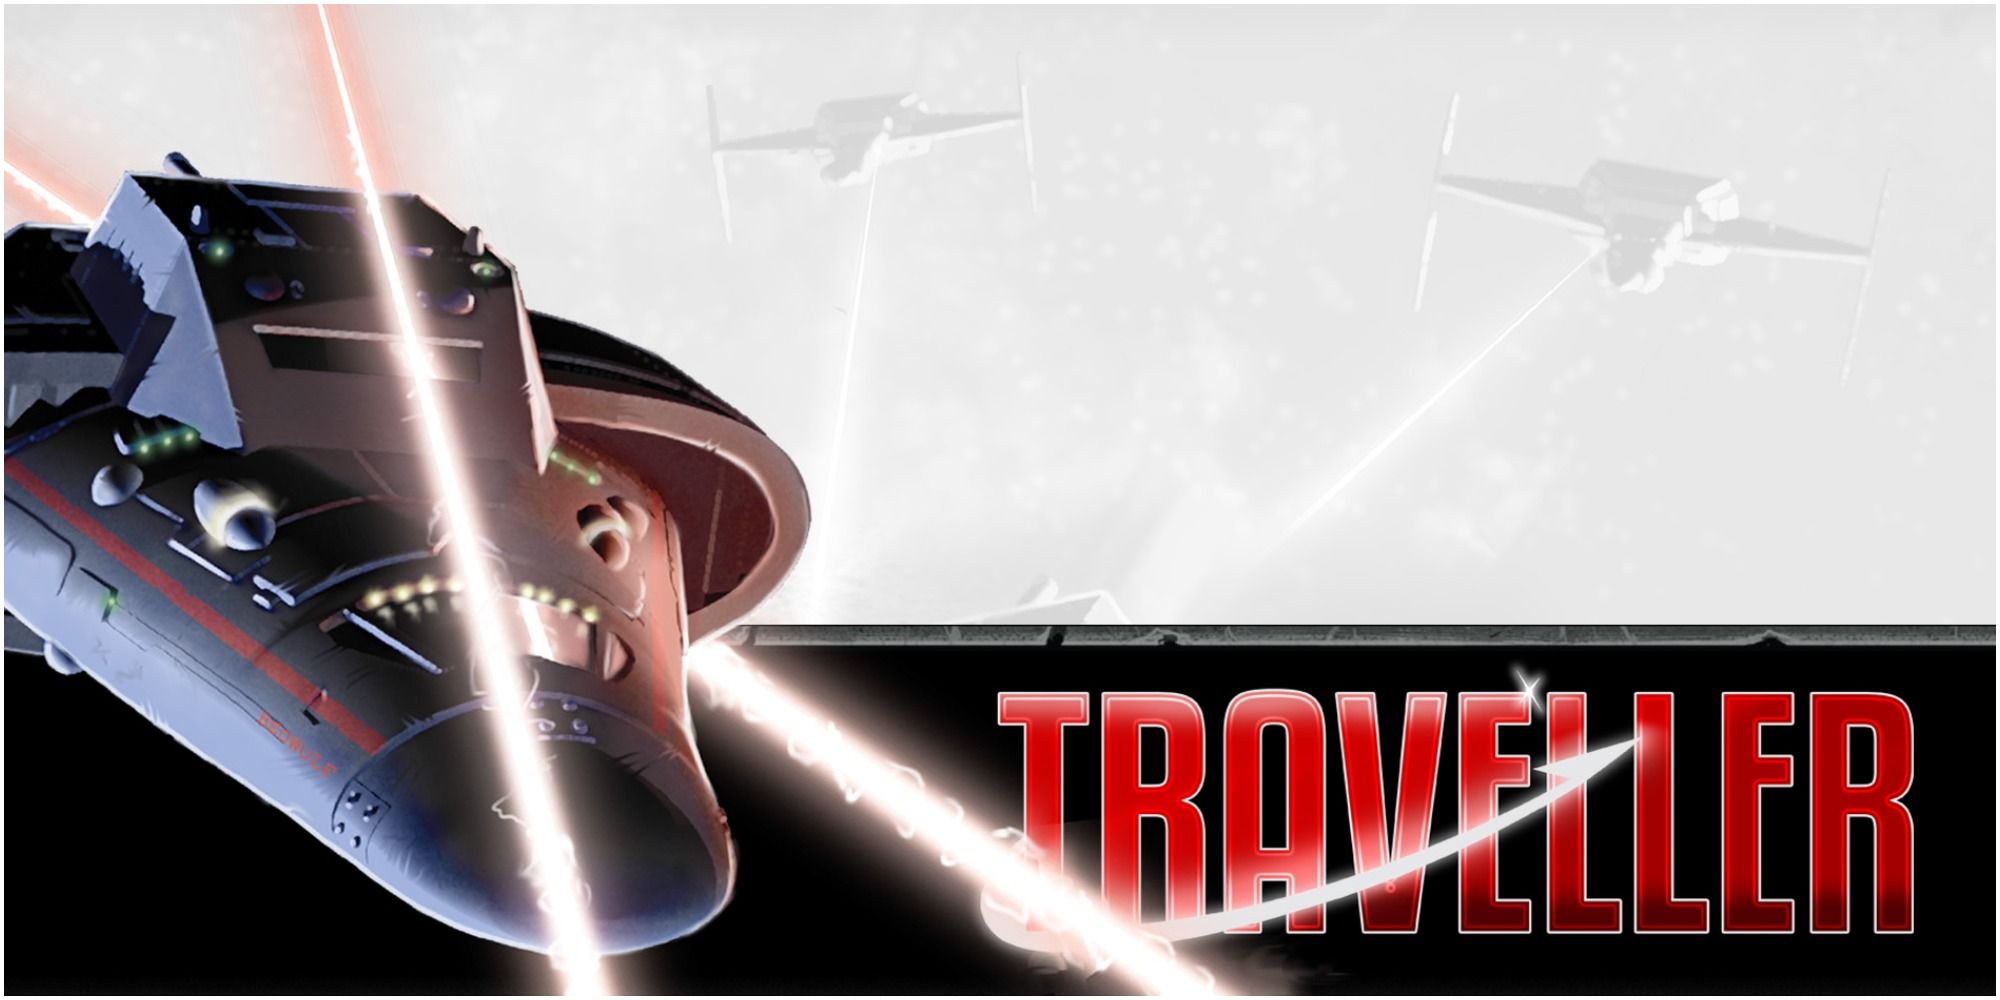 traveller space ship and logo